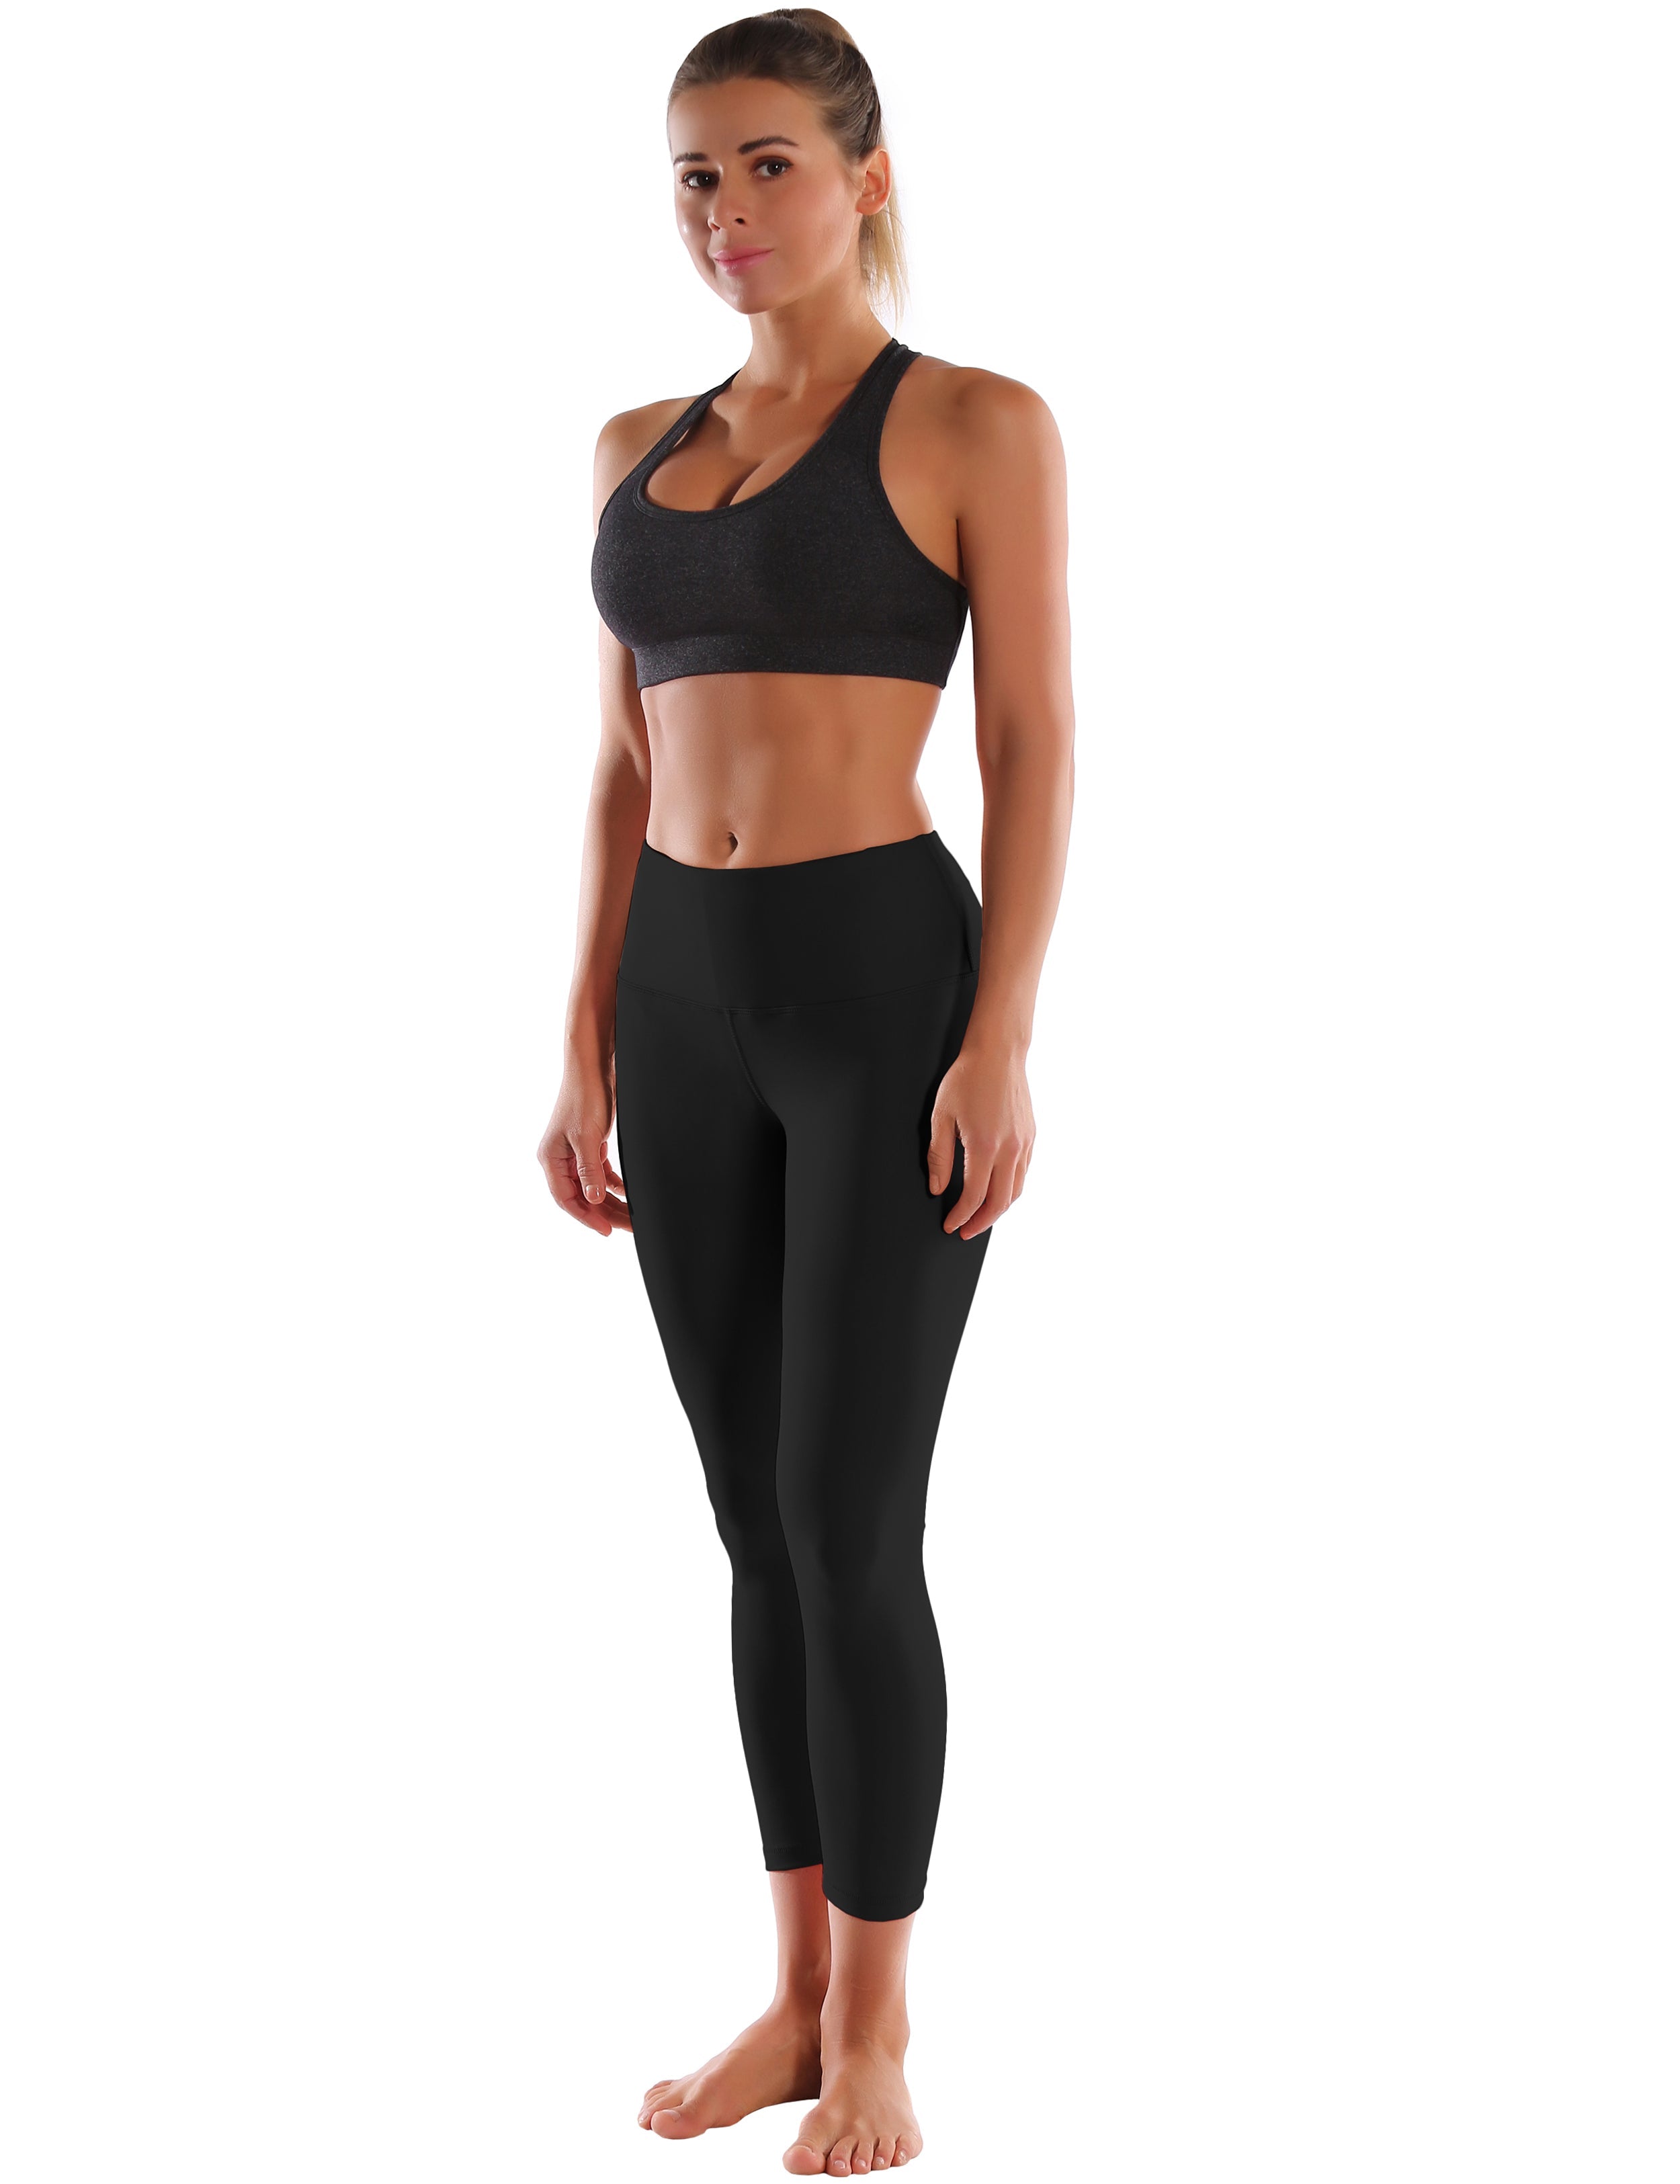 22" High Waist Crop Tight Capris black 75%Nylon/25%Spandex Fabric doesn't attract lint easily 4-way stretch No see-through Moisture-wicking Tummy control Inner pocket